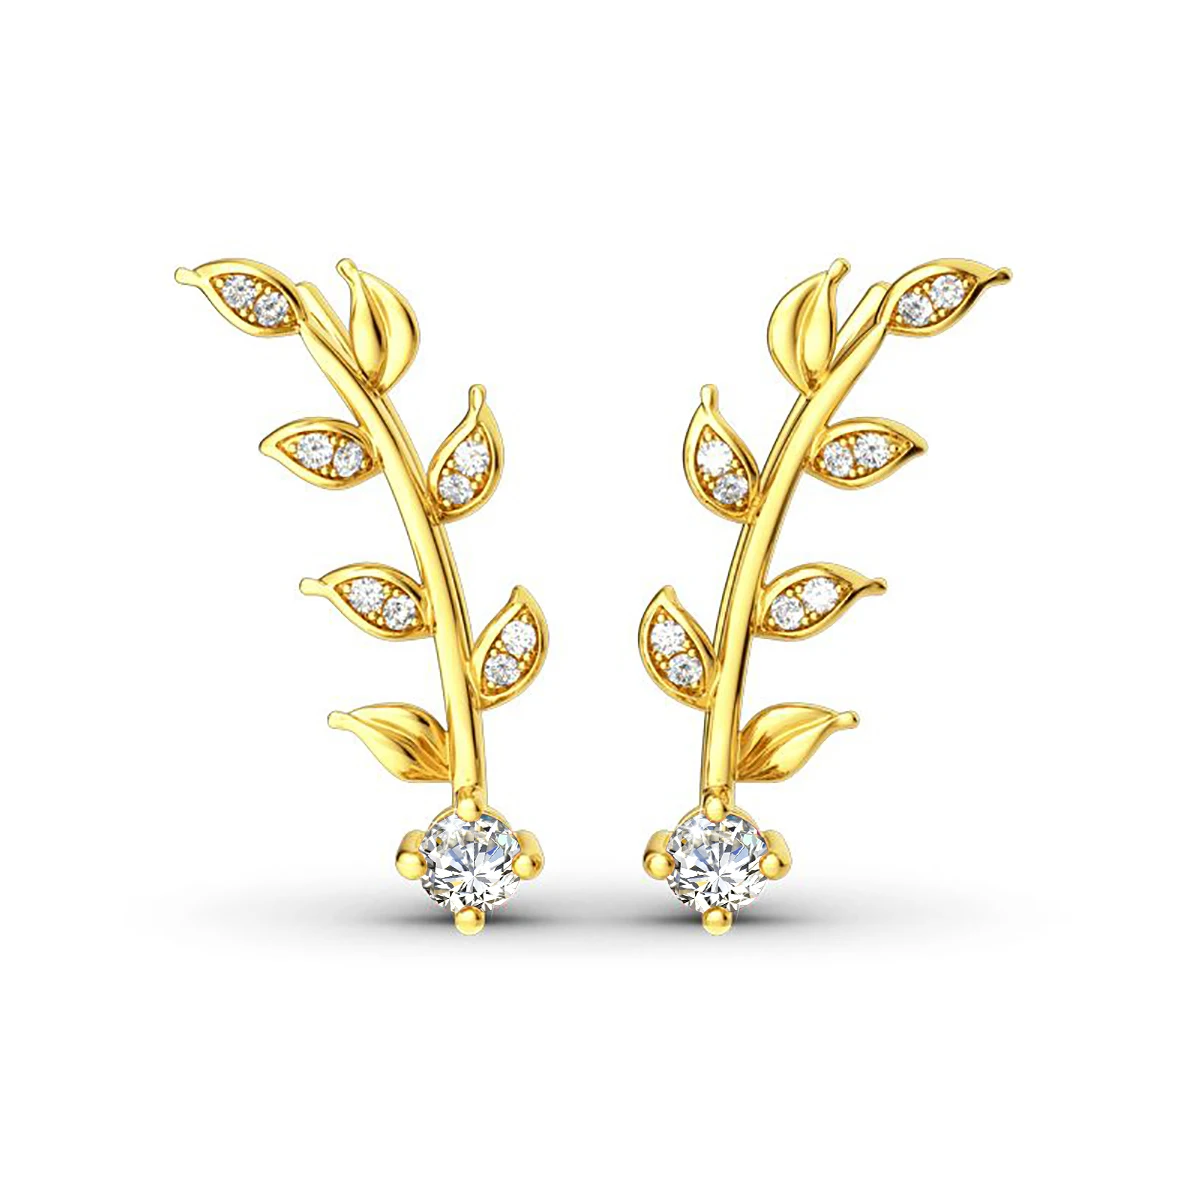 100% Moissanite Earring for Woman 0.3ct Gemstone 14K Gold Color of Climber Perforation Earrings Olive Leaf Pattern Fine Jewelry